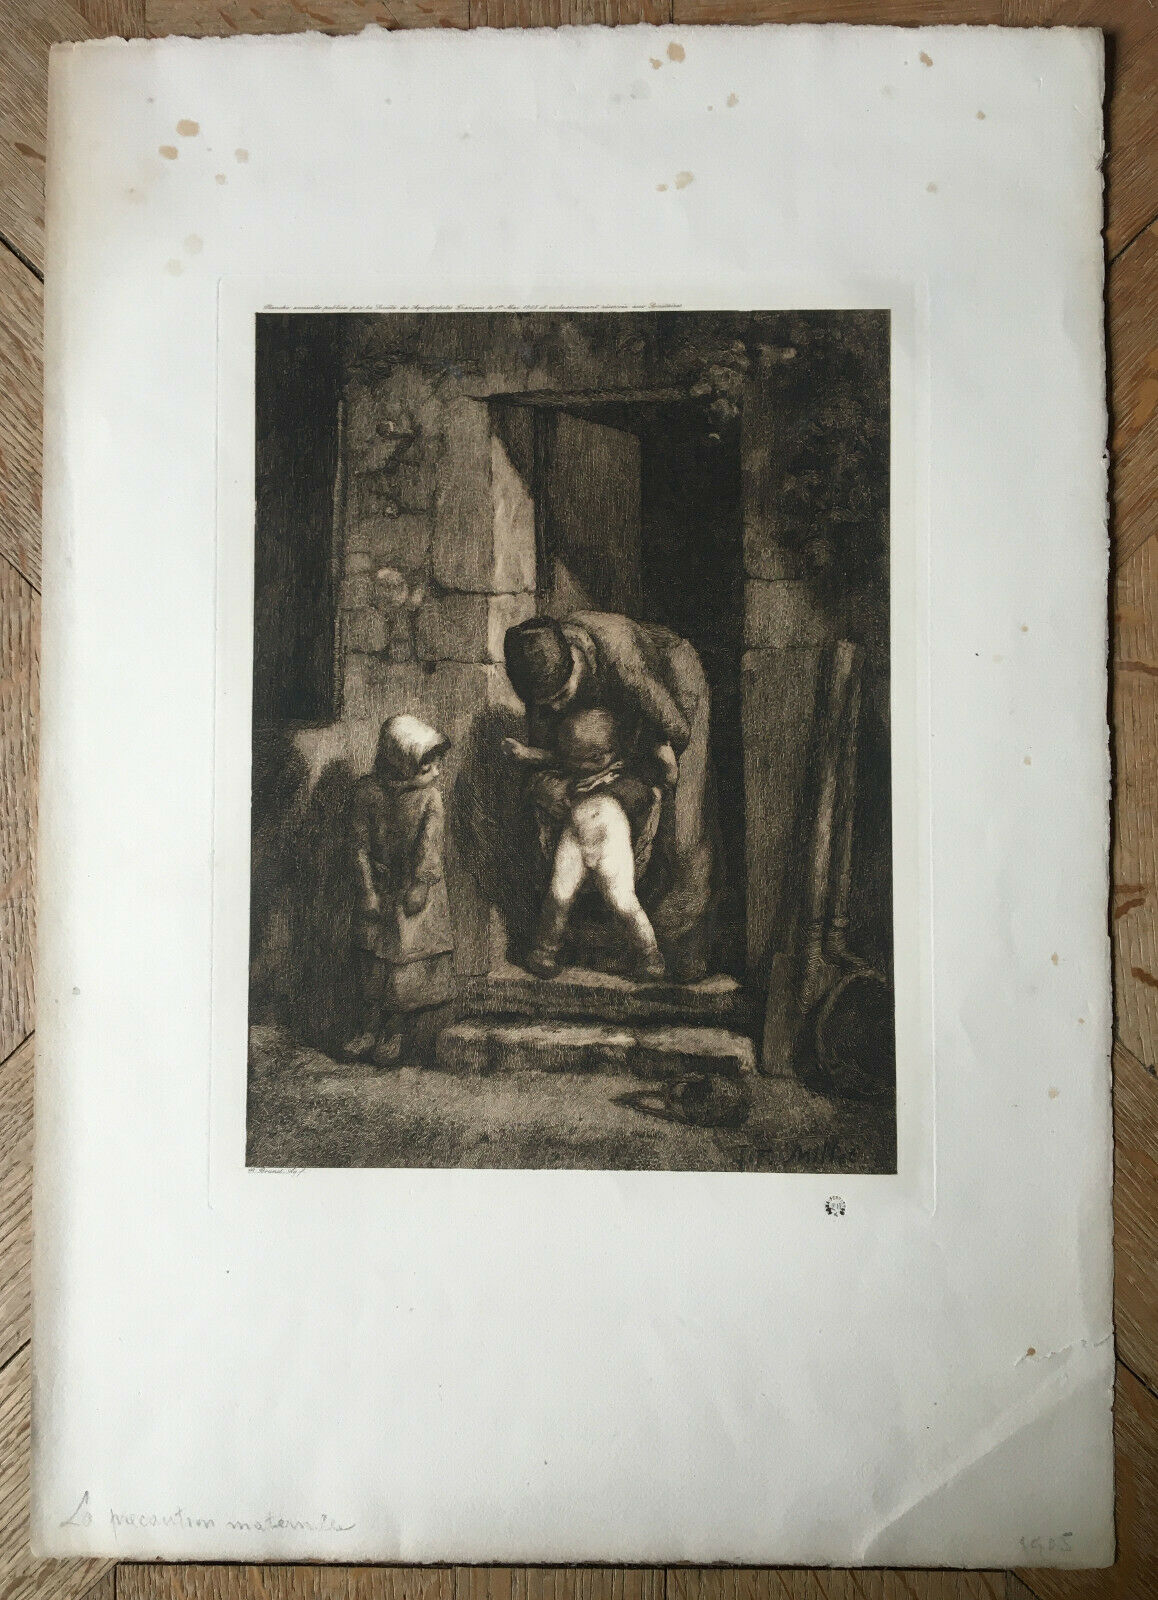 JEAN-FRANÇOIS MILLET - MATERNAL PRECAUTION - SIGNED ETCHING AND N° - 1905.